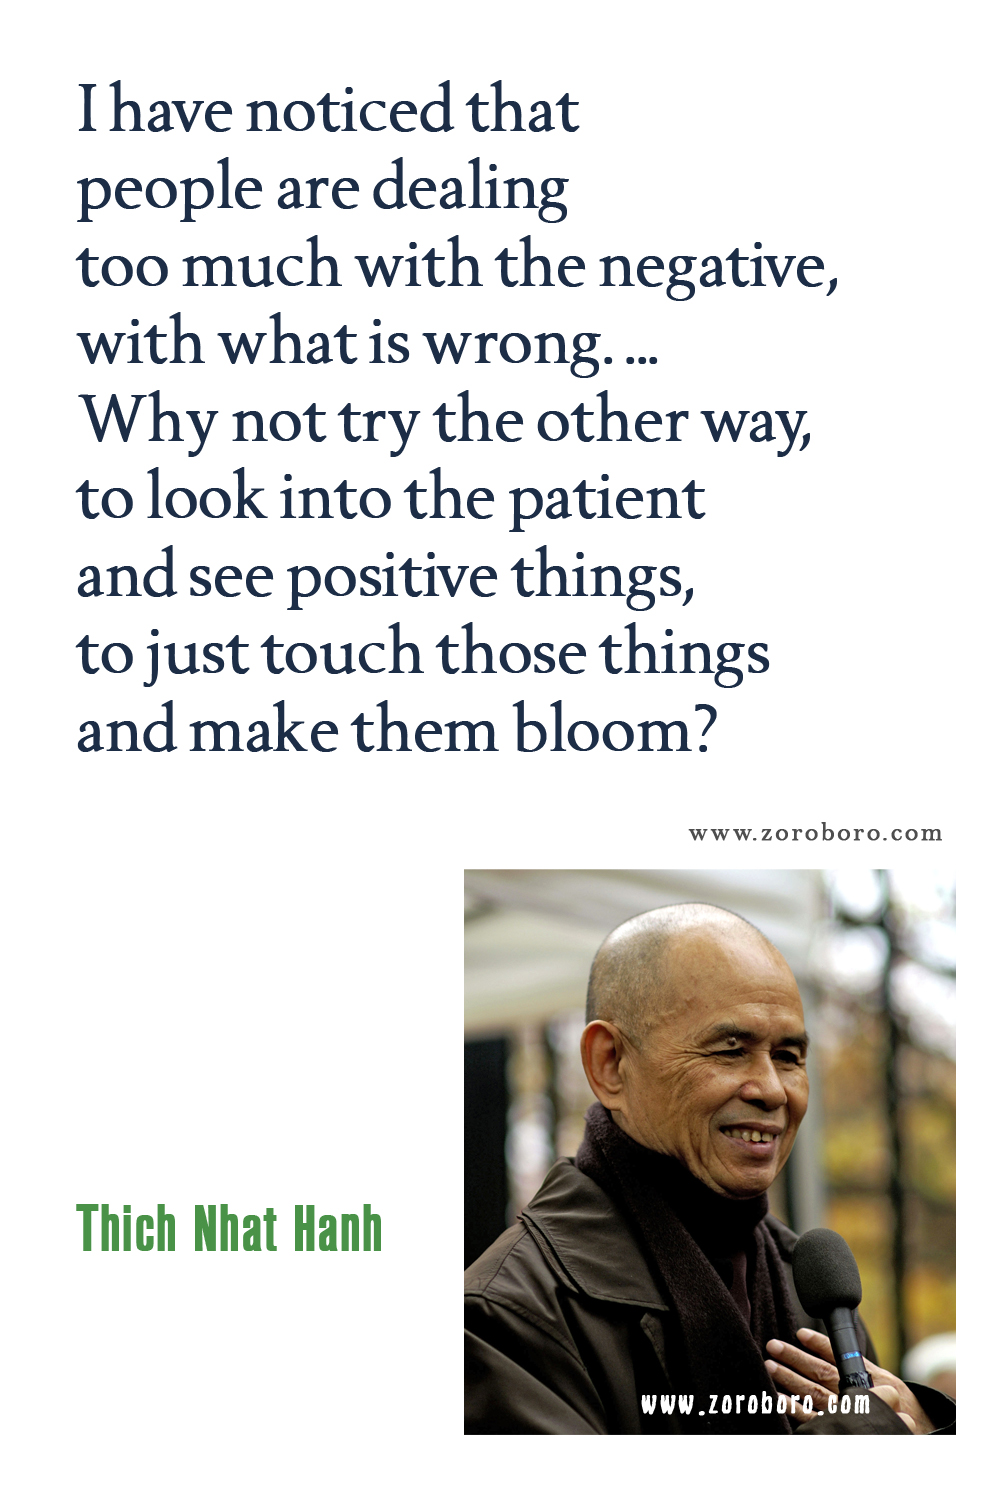 Thich Nhat Hanh Quotes, Thich Nhat Hanh Teaching, Thich Nhat Hanh Mind, Peace, Love & Empathy Quotes, Thich Nhat Hanh Books Quotes, Spiritual Quotes, Thich Nhat Hanh Inspirational Quotes